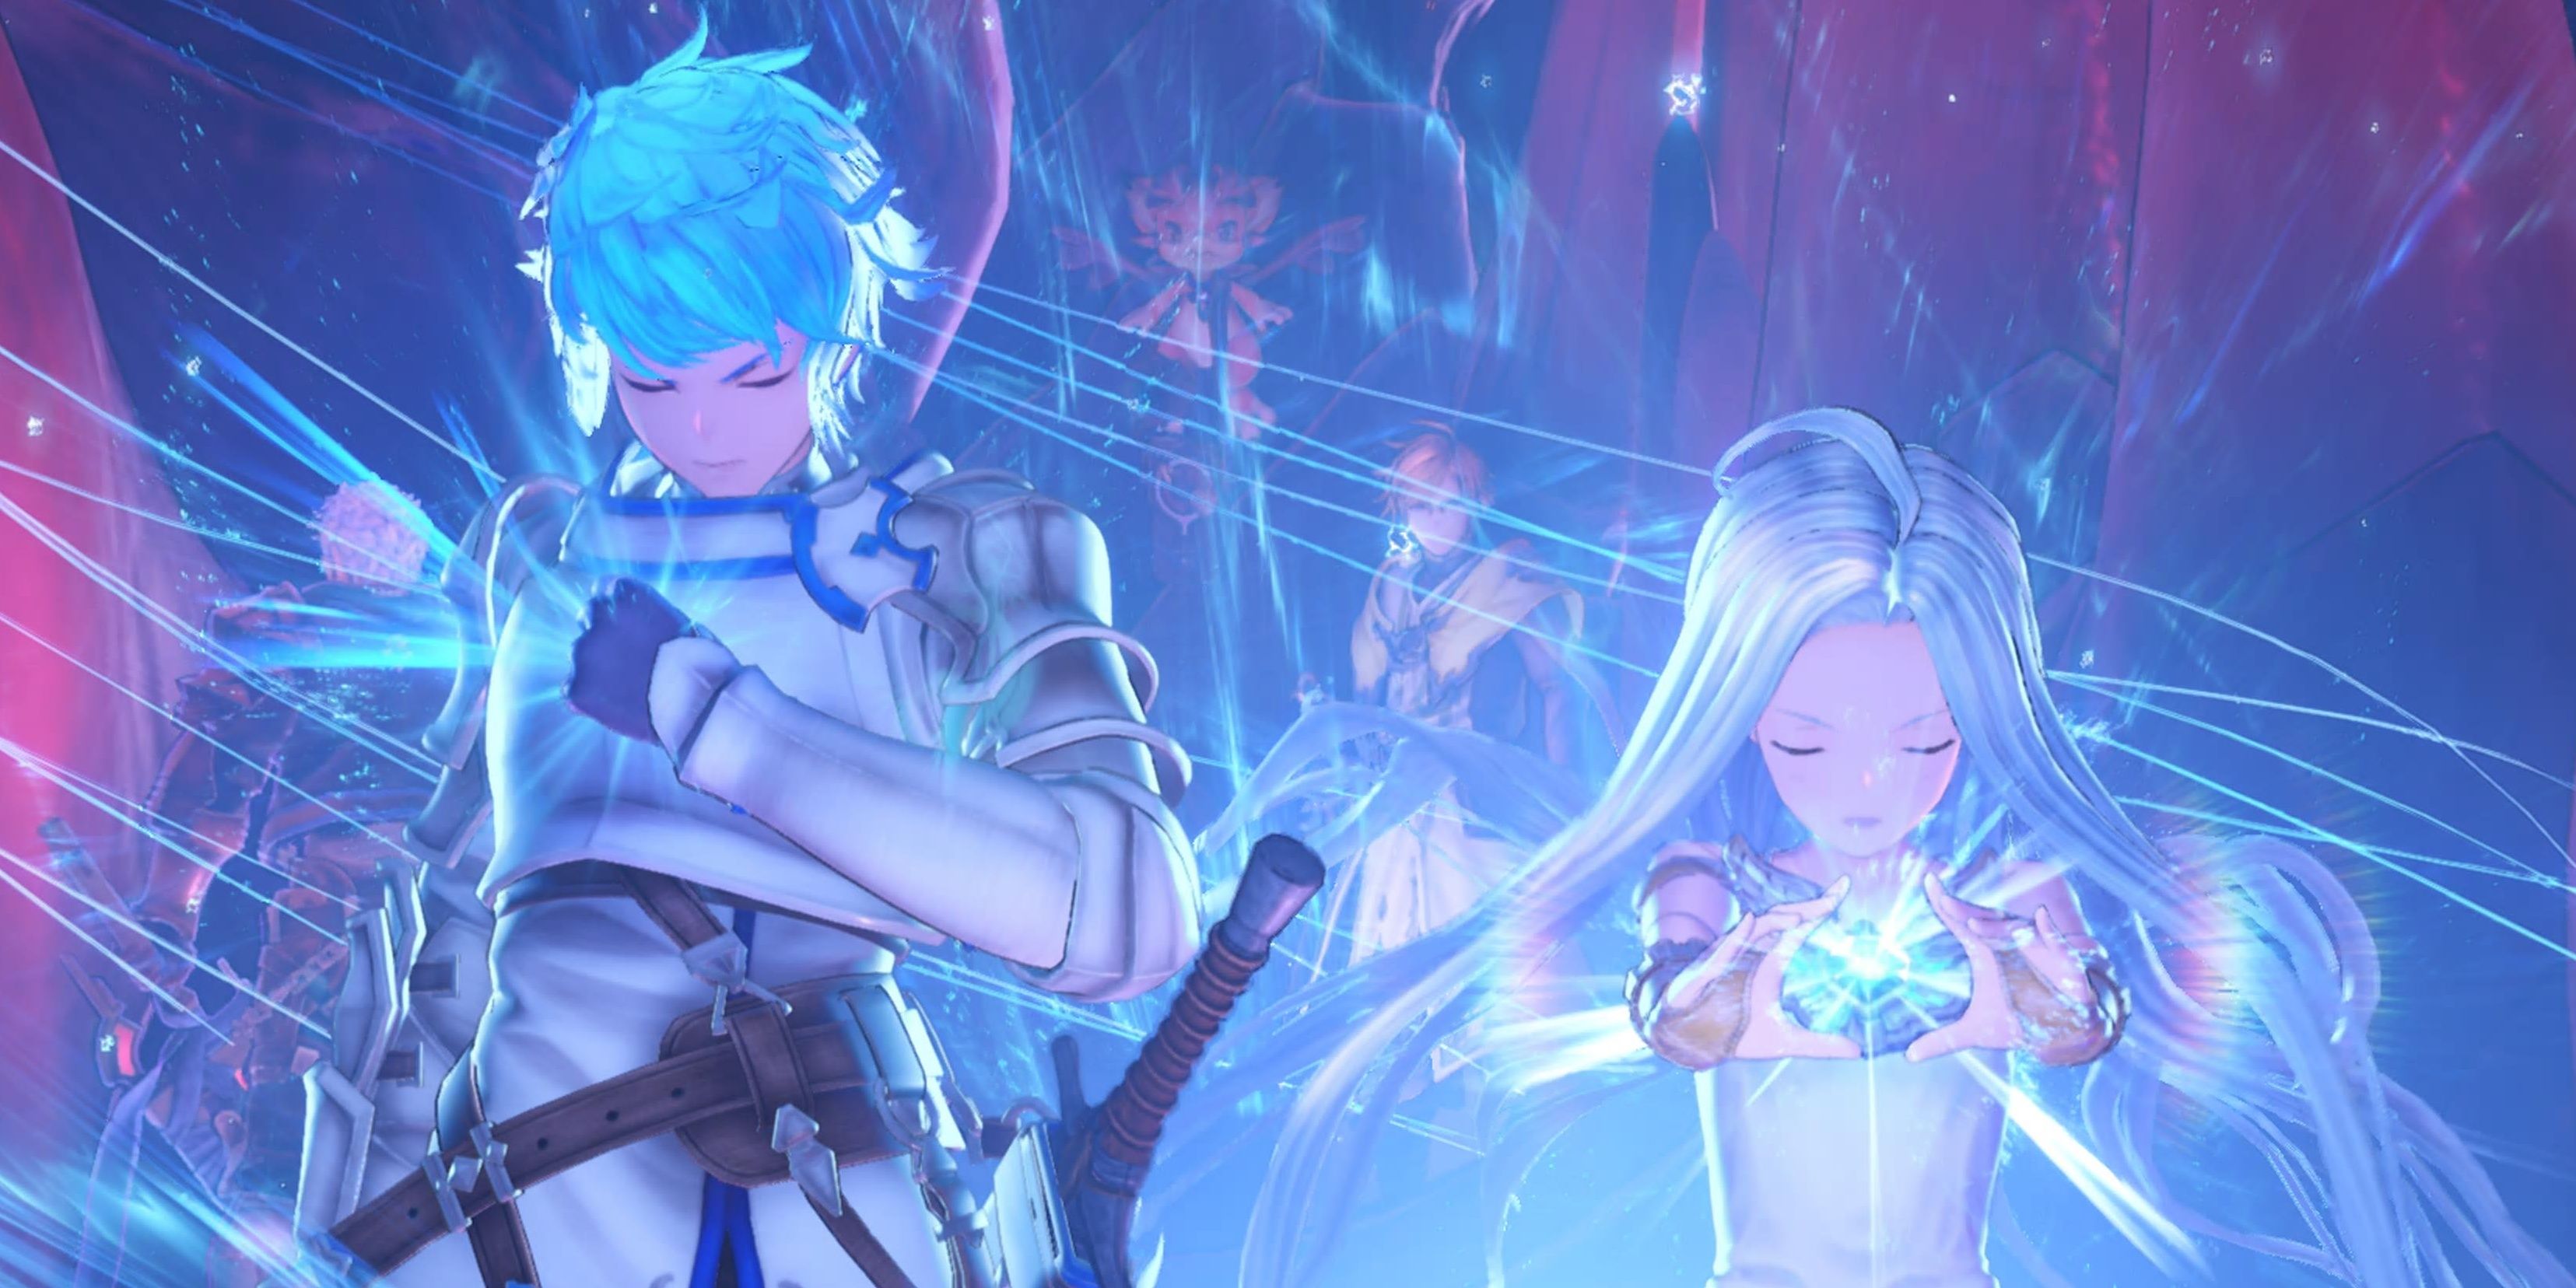 Lyria and Gran combine forces in Granblue Fantasy Relink